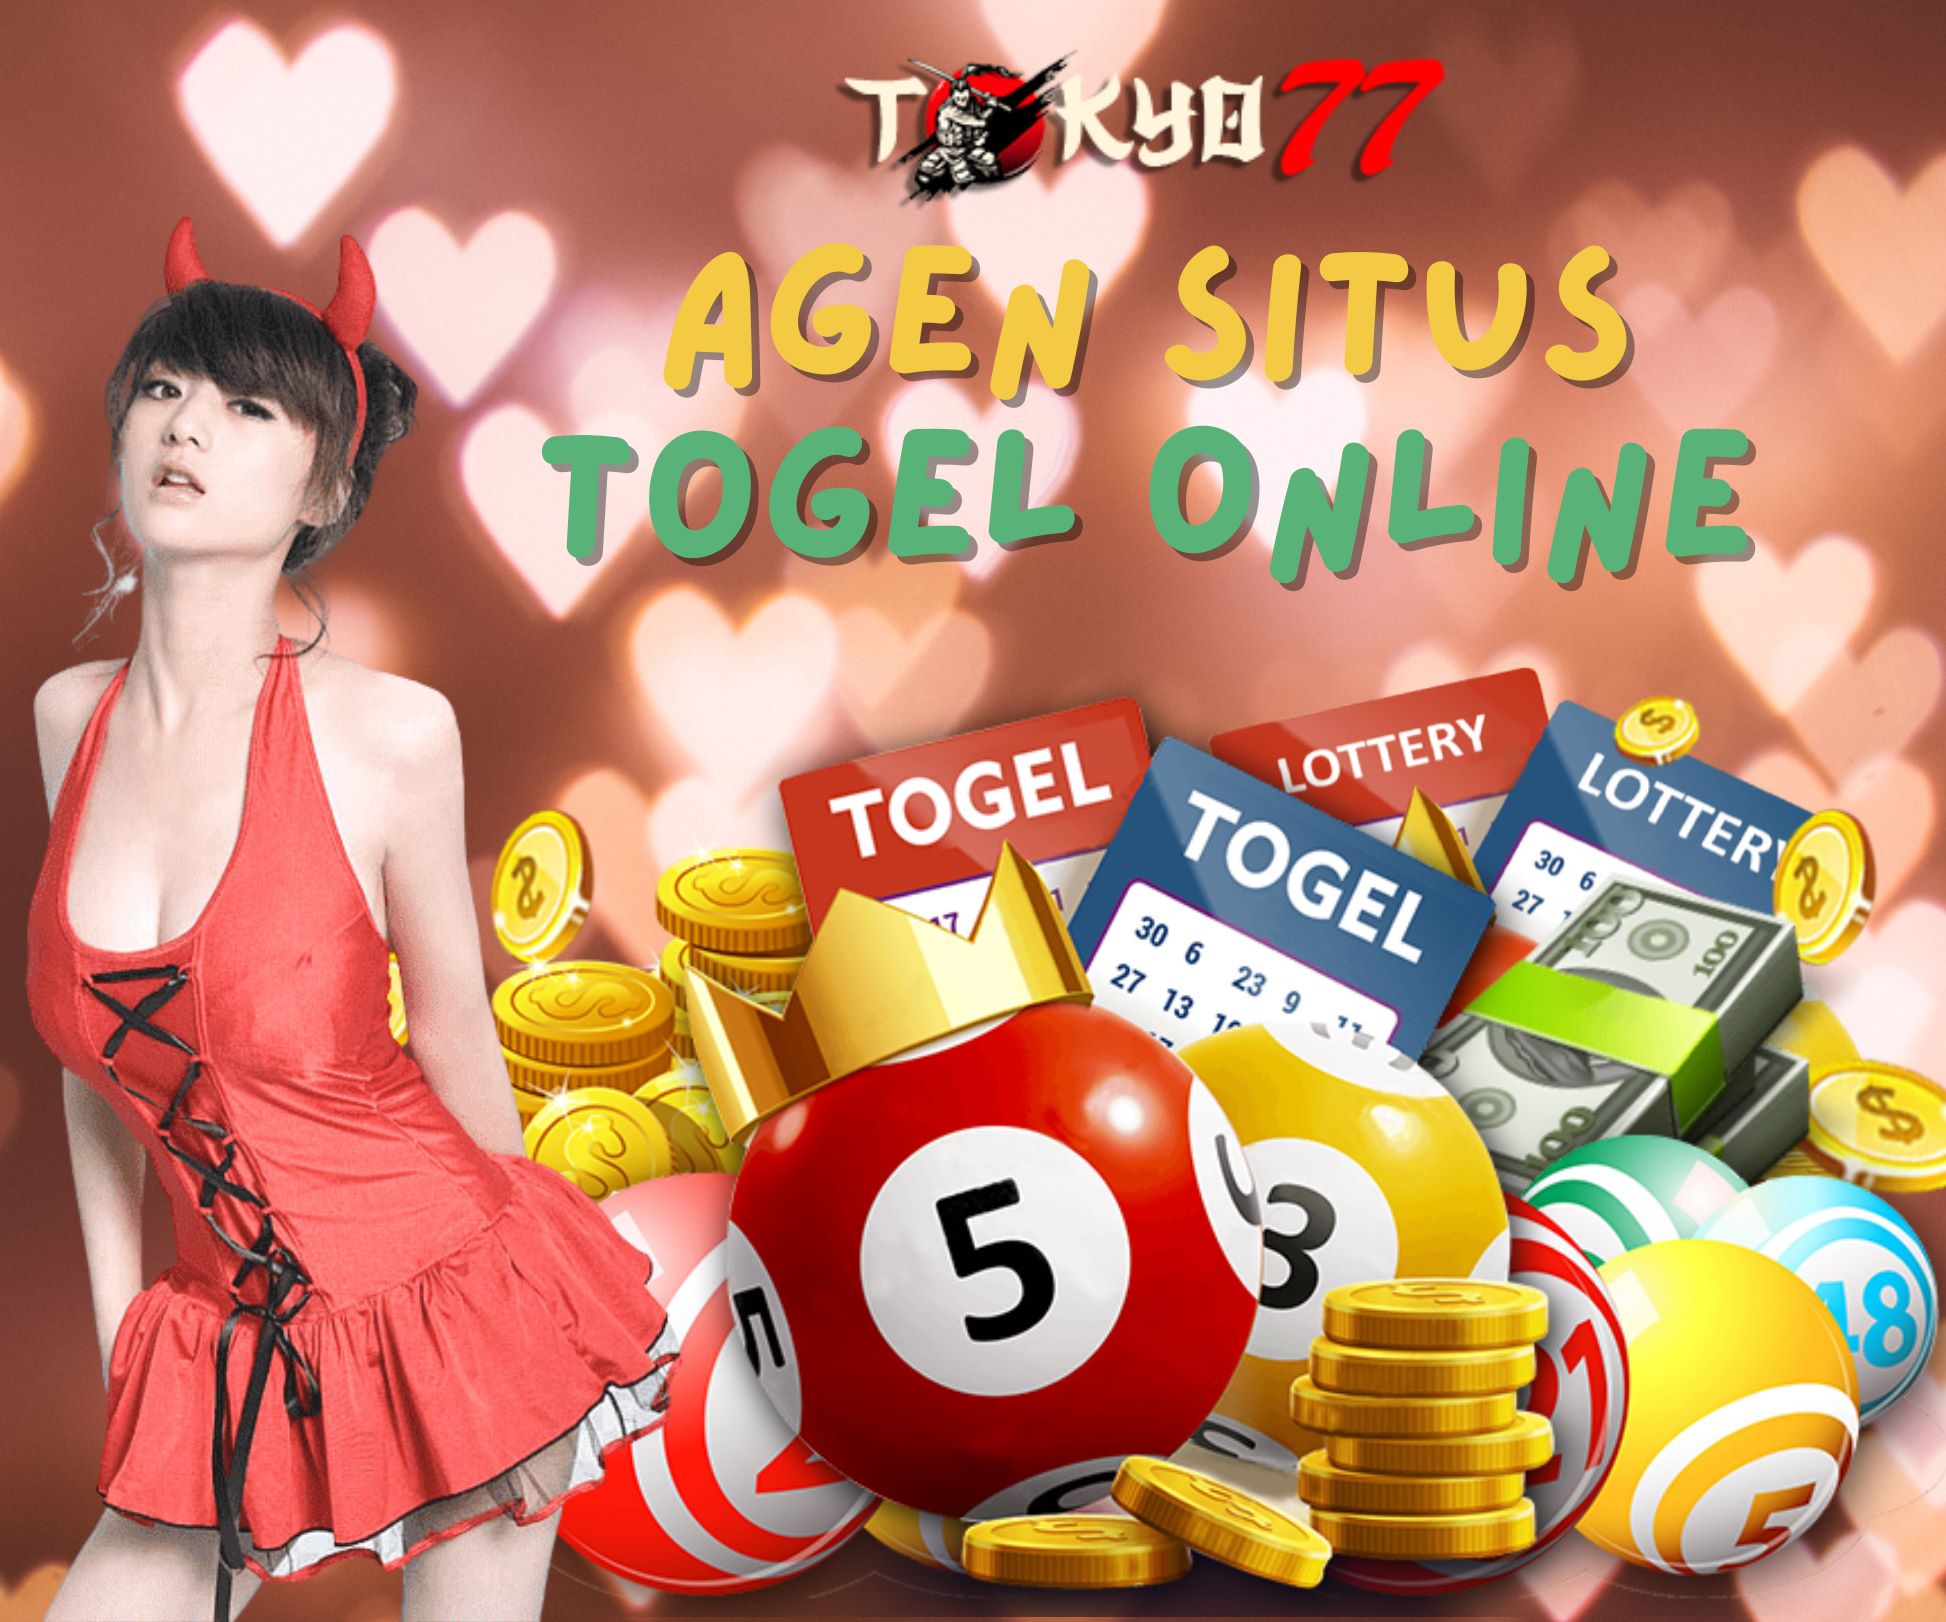 TOGEL Online: A Game that Has Become a Culture in Several Countries